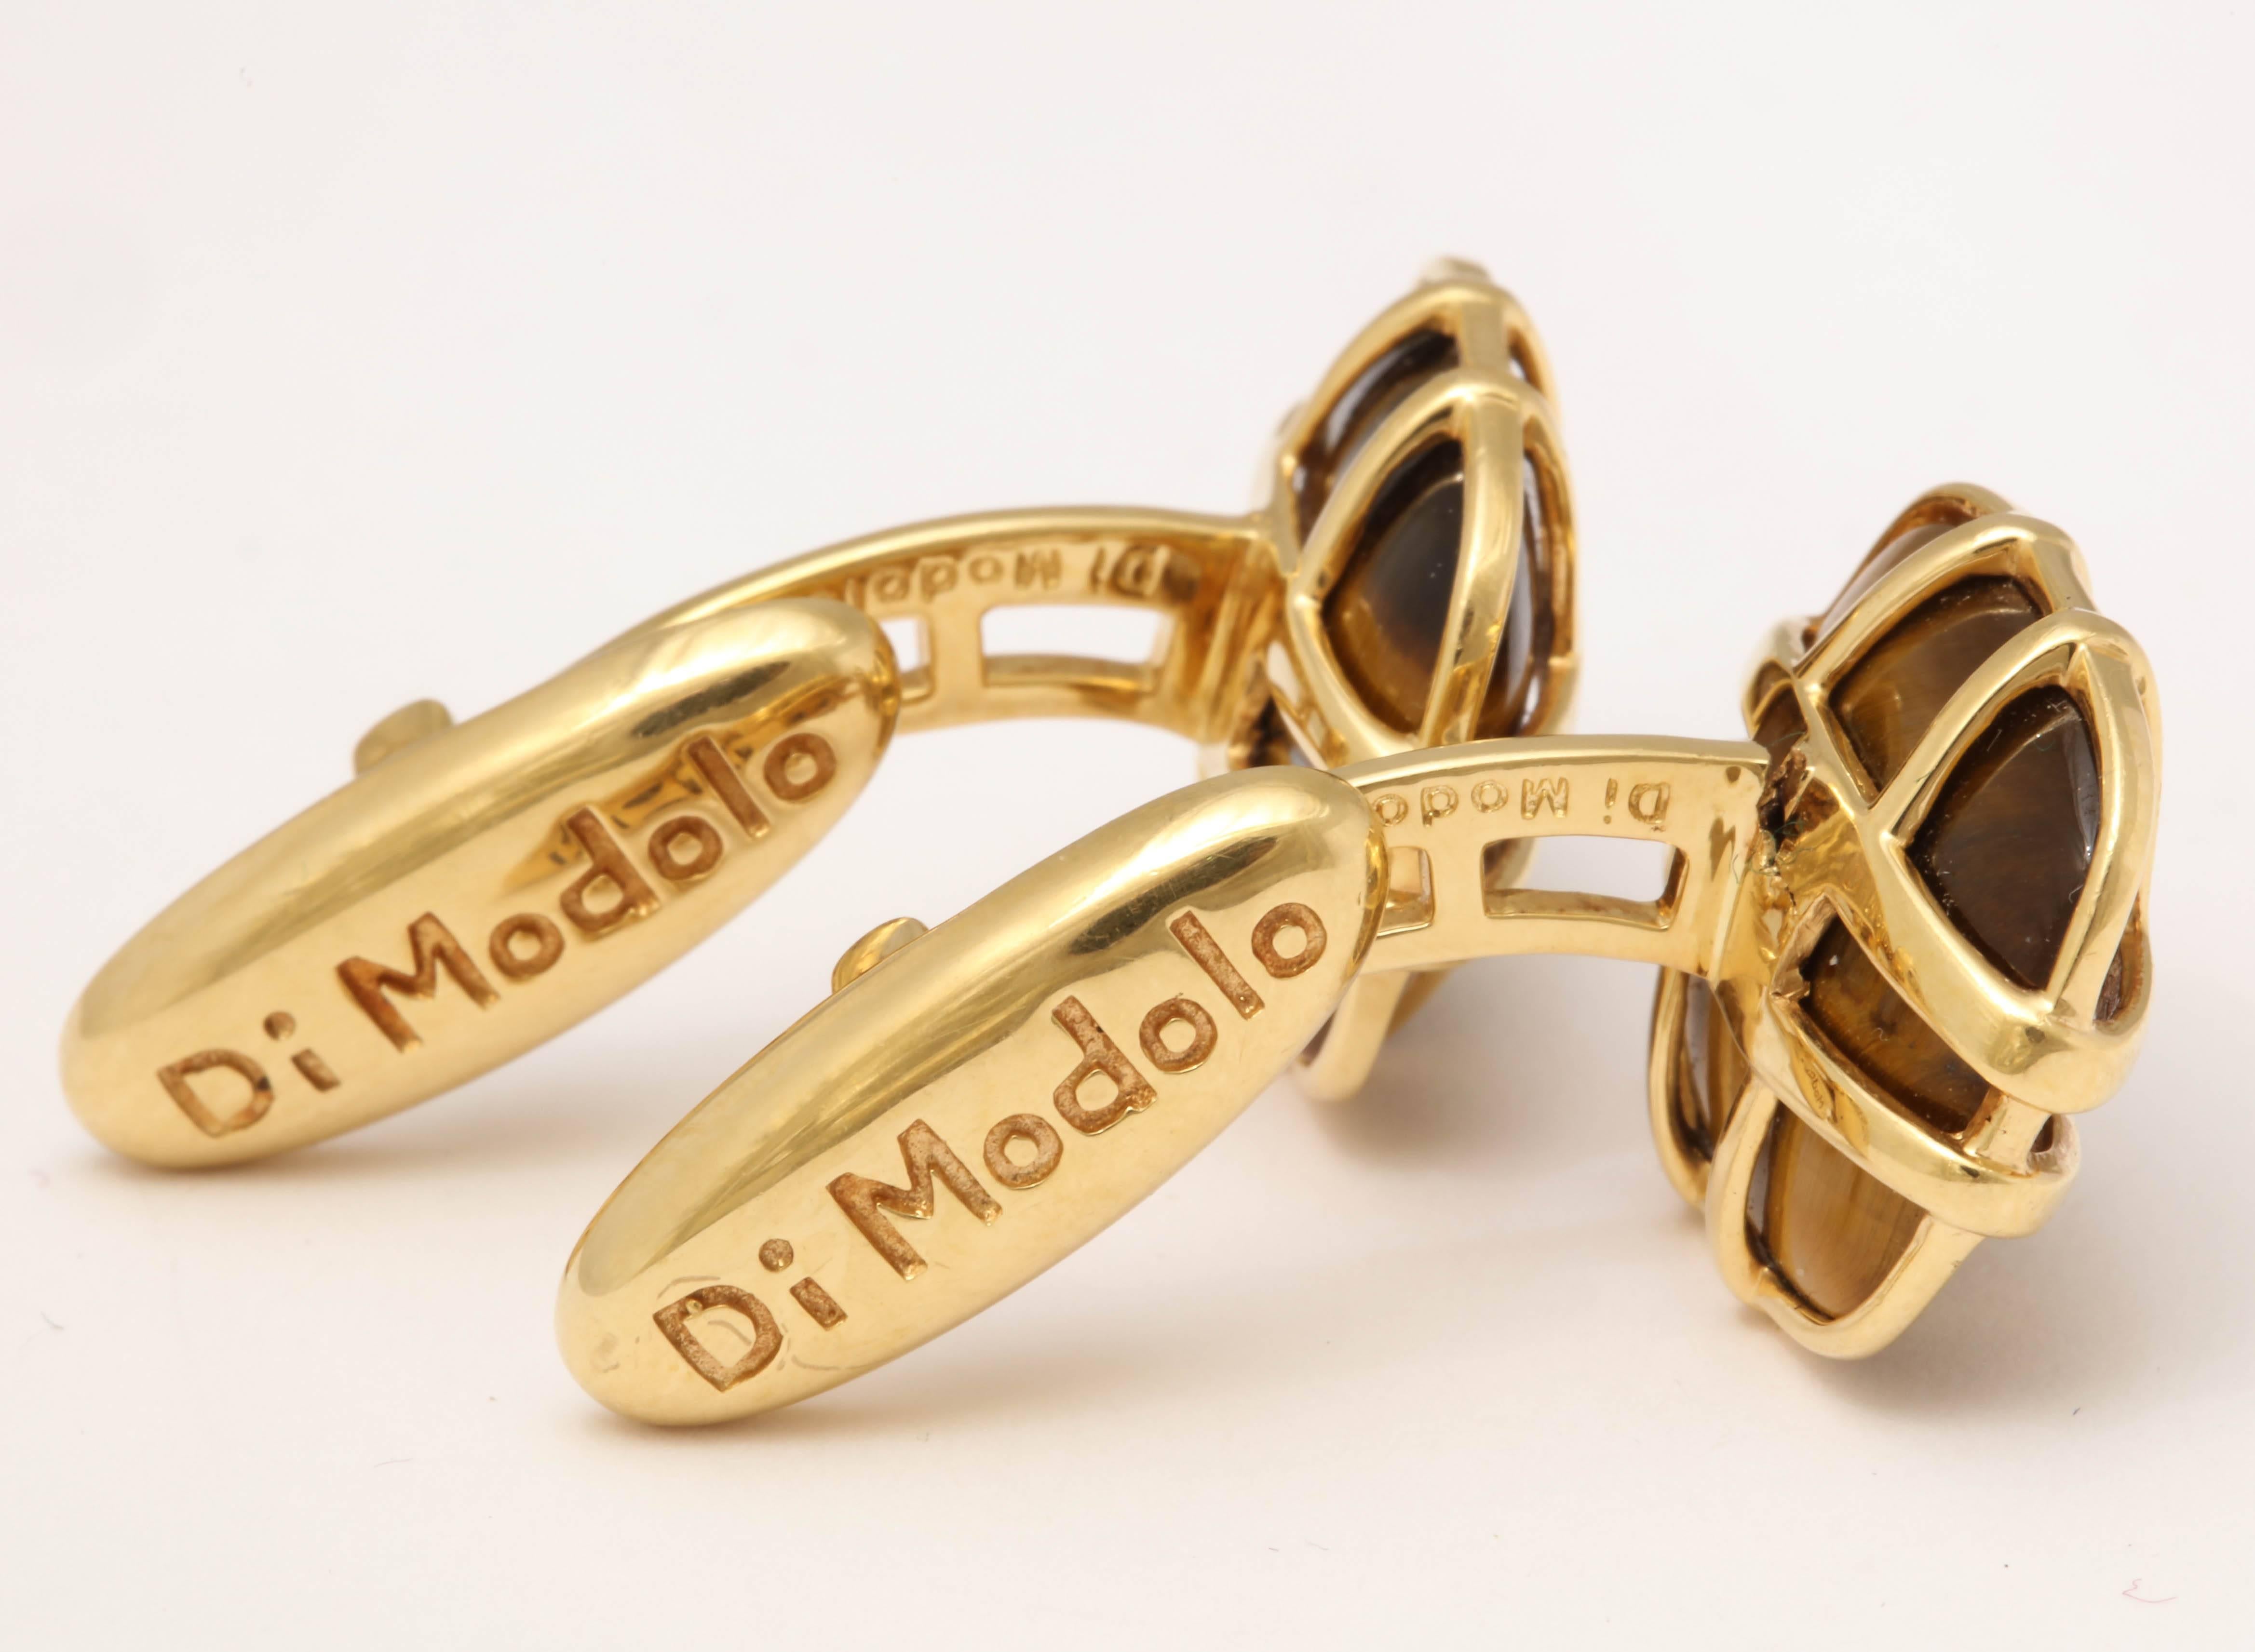 1990s Di Modolo Tiger's Eye in the Cage Flip Up Gold Cufflinks In Excellent Condition For Sale In New York, NY